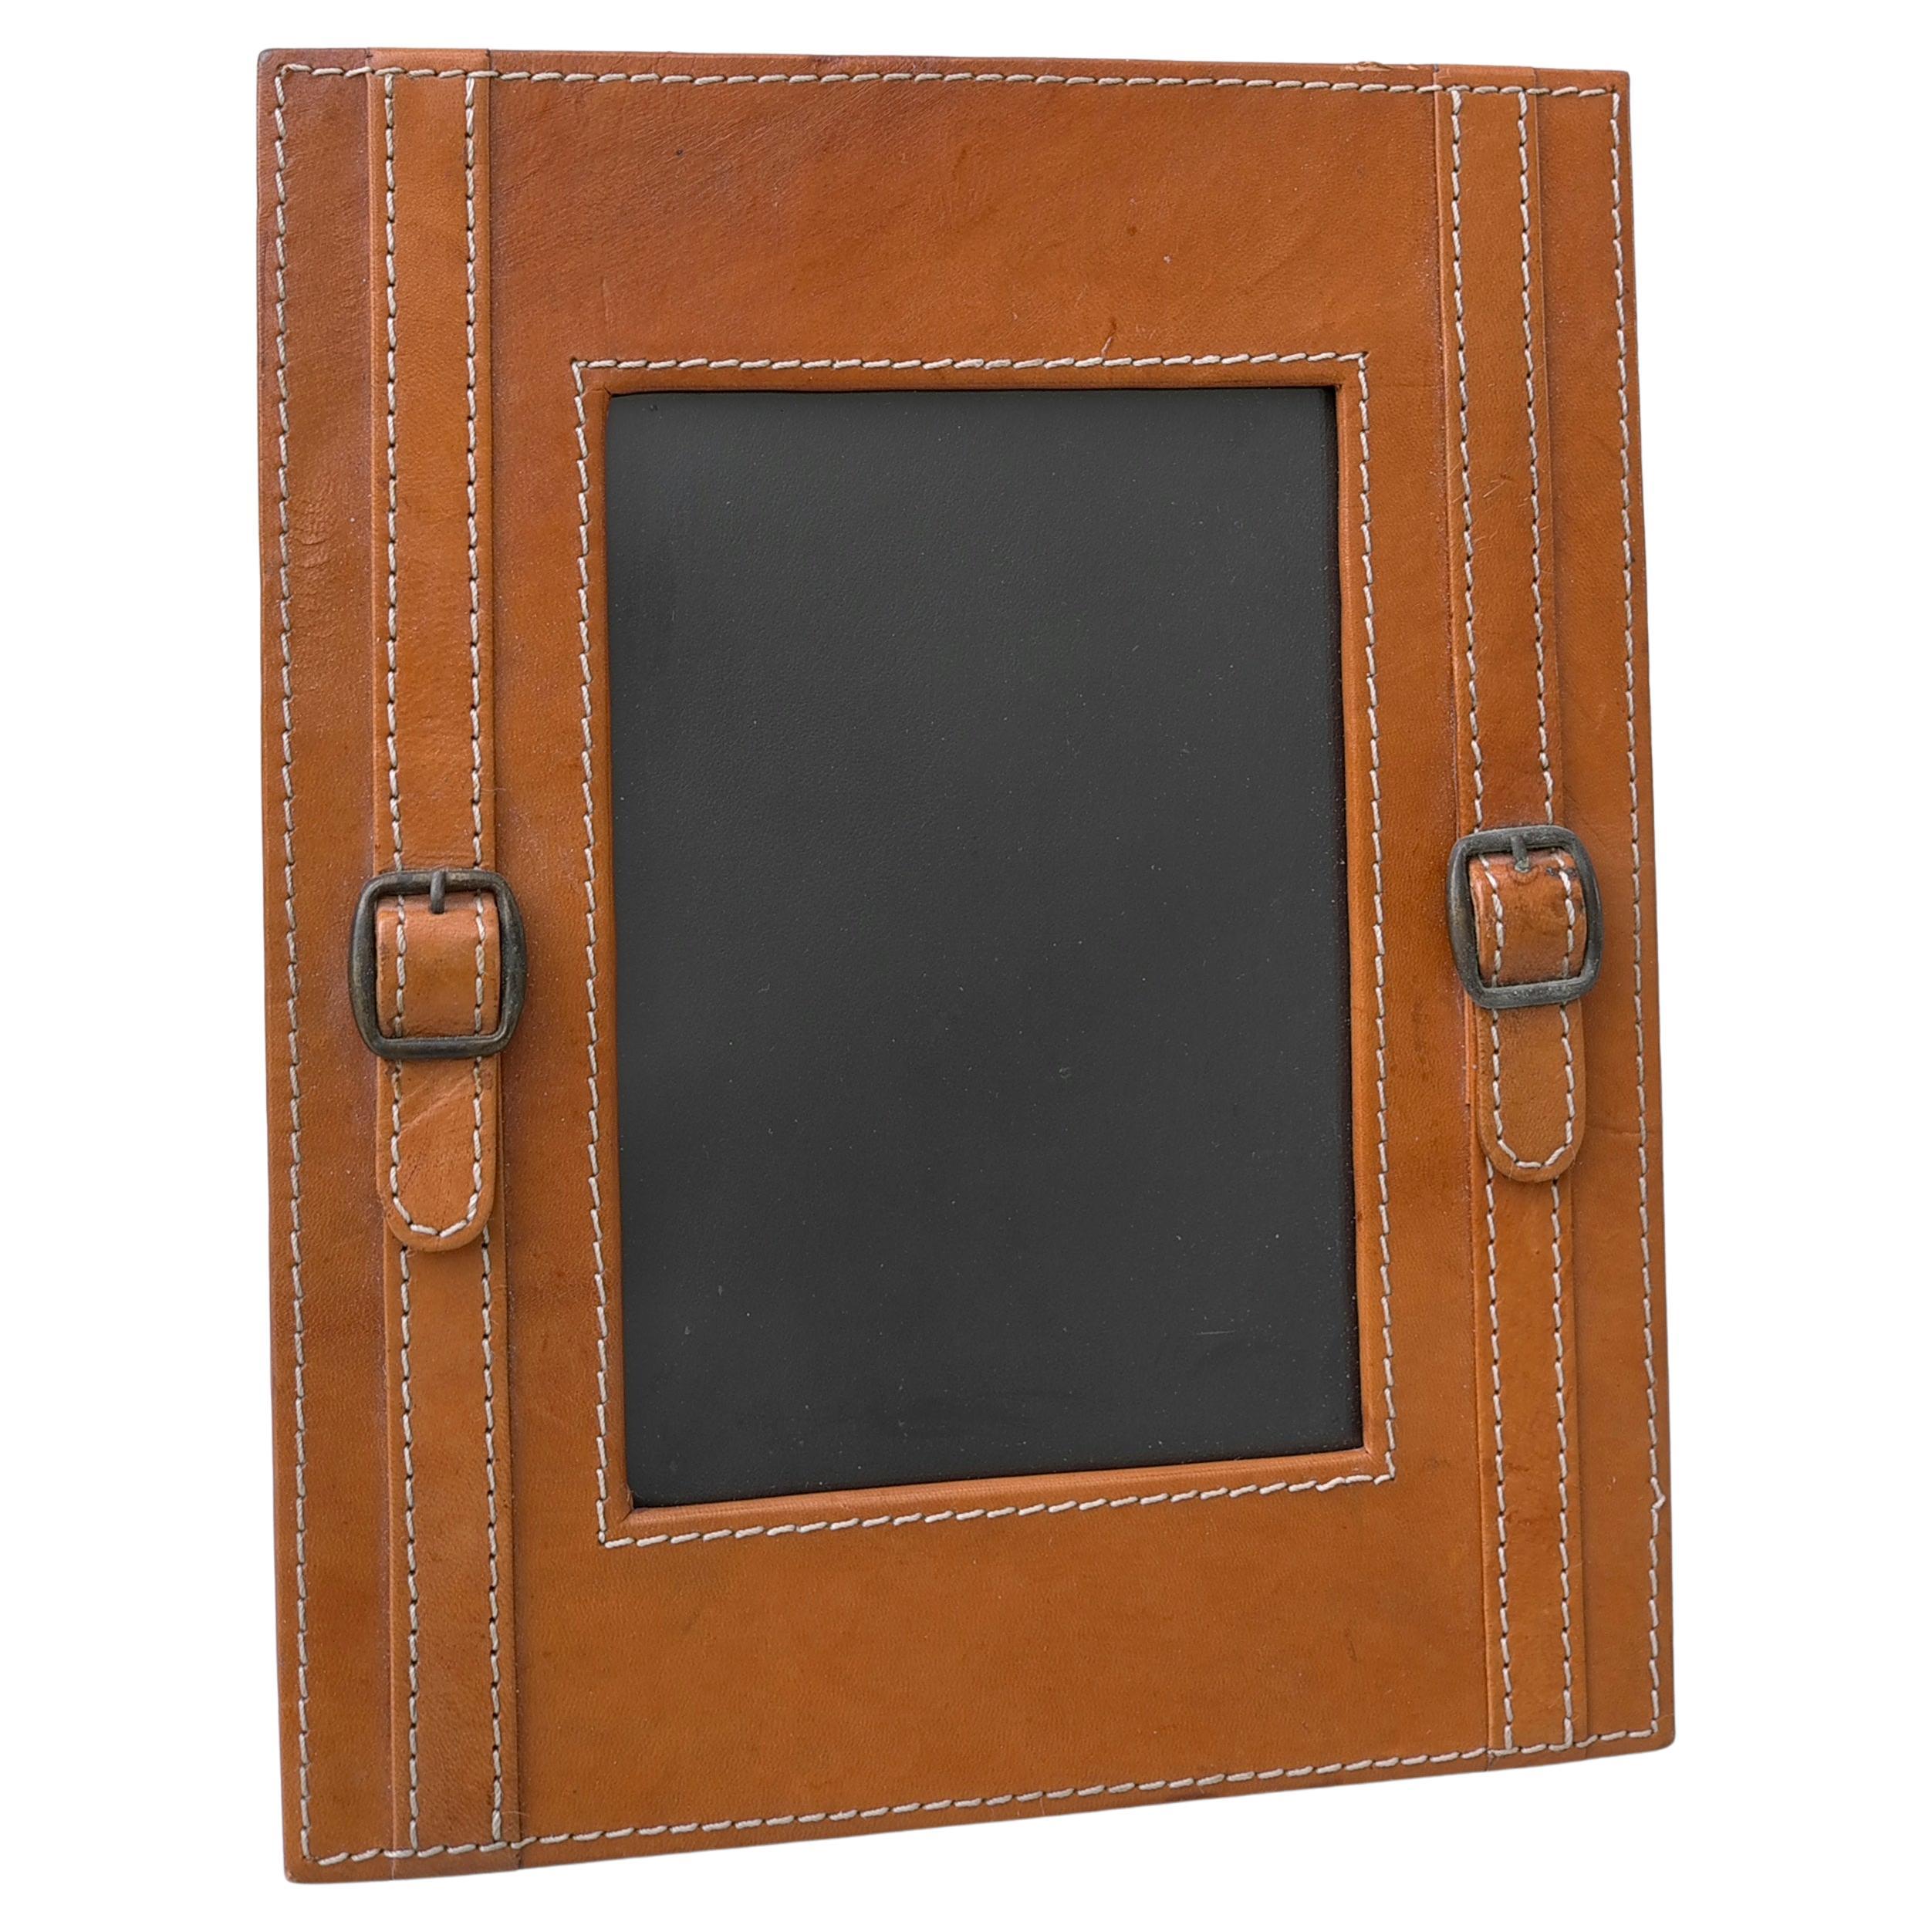 Hand-Stitched Cognac Leather Picture Frame in Style of Jacques Adnet For Sale